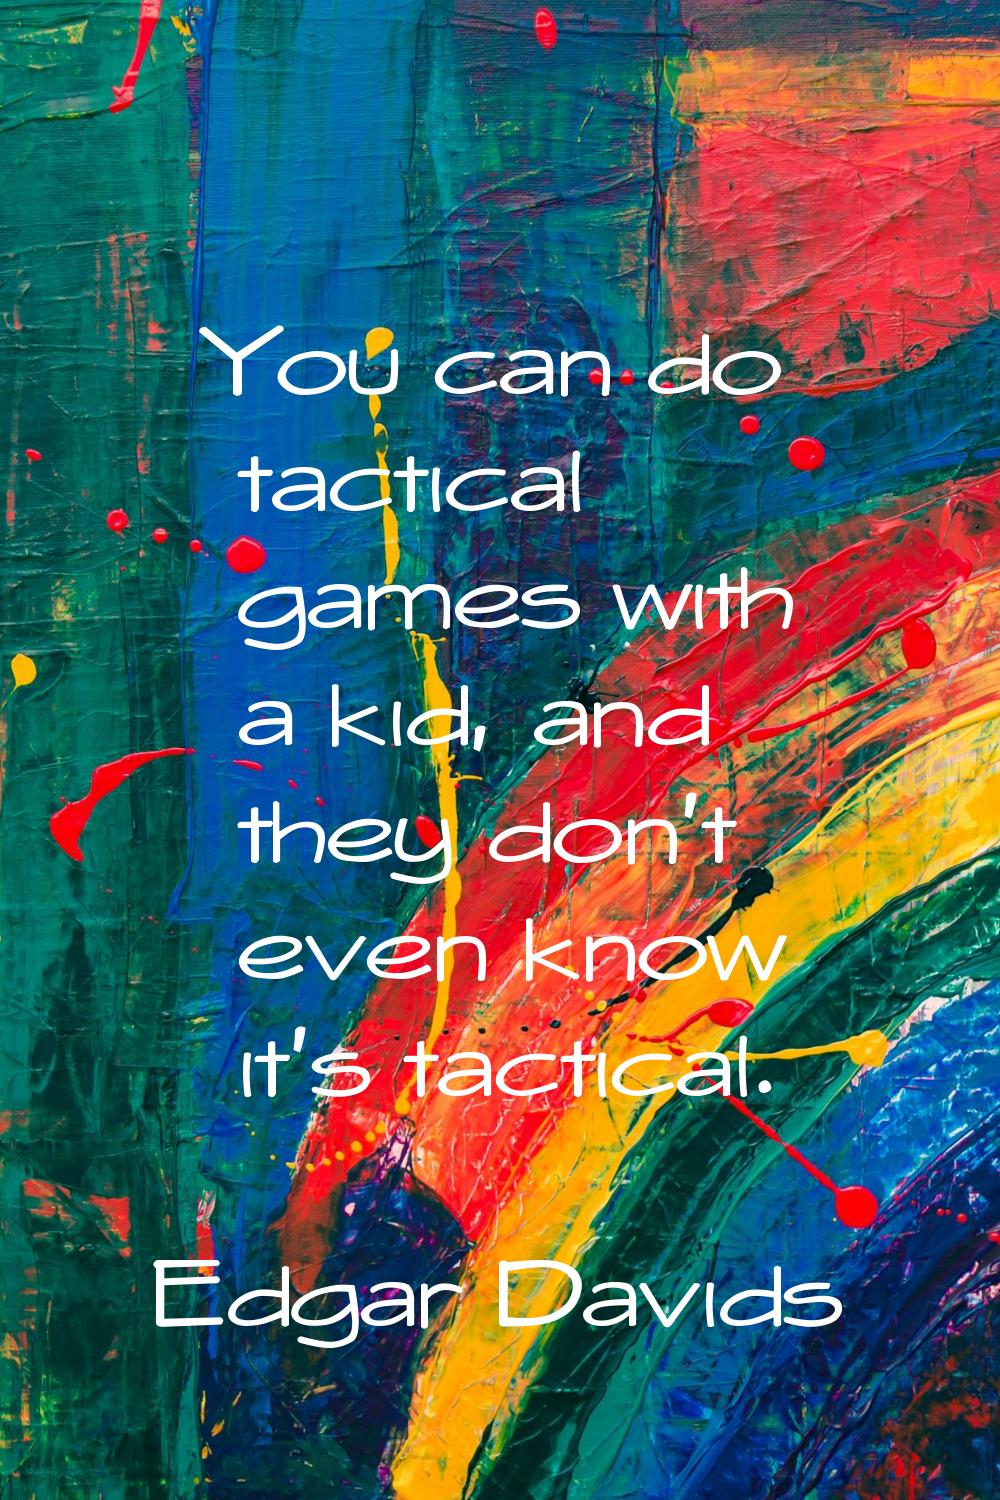 You can do tactical games with a kid, and they don't even know it's tactical.